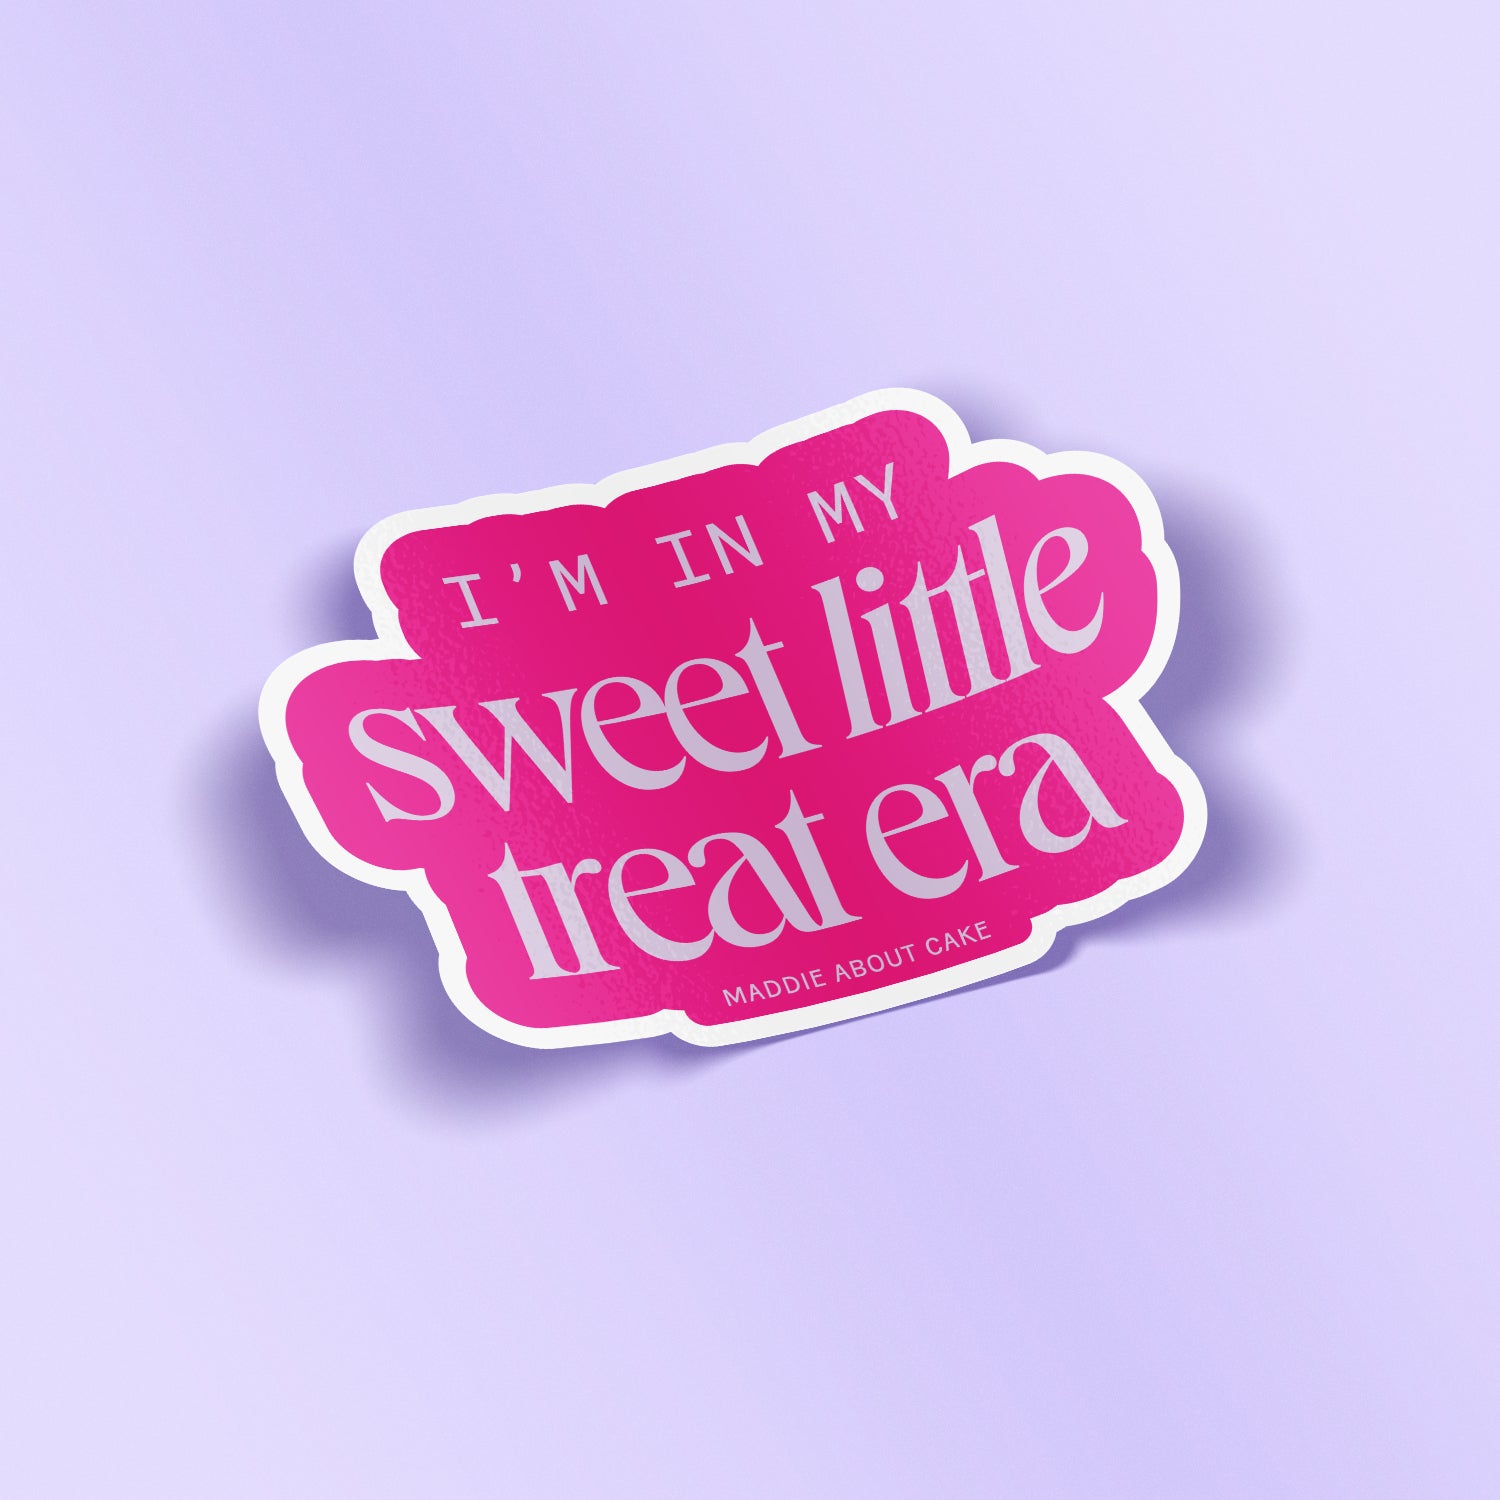 Decorative sticker that says "I'm in my sweet little treat era" in lilac text on a hot pink background. The sticker is laying on a lilac background.